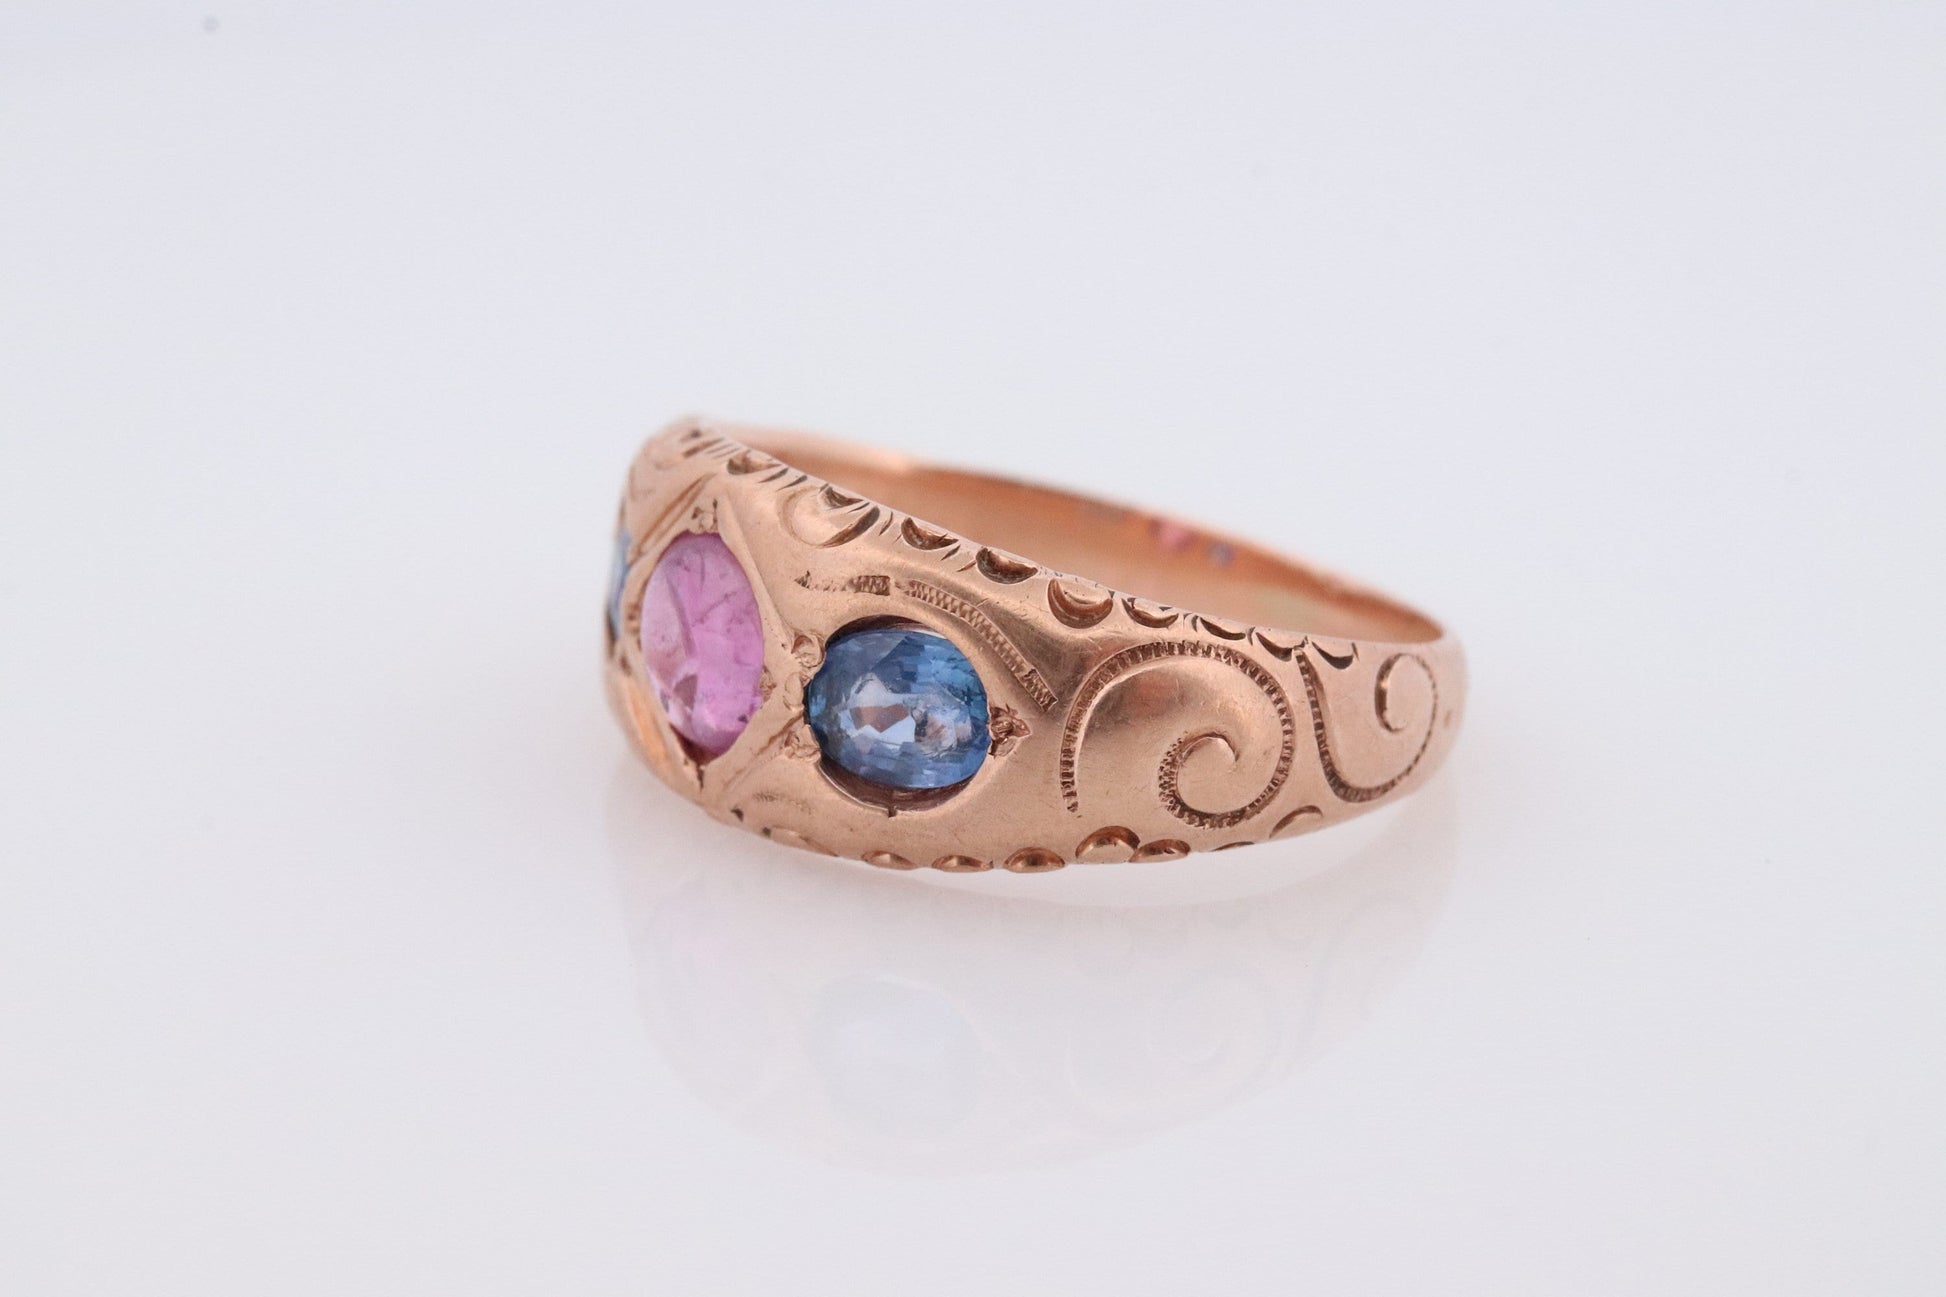 Antique 10k Triple Ruby Sapphire signet ring. Gypsy Cabochon Ruby bezel set into Signet band. 10k Gold Anniversary Three stone band ring